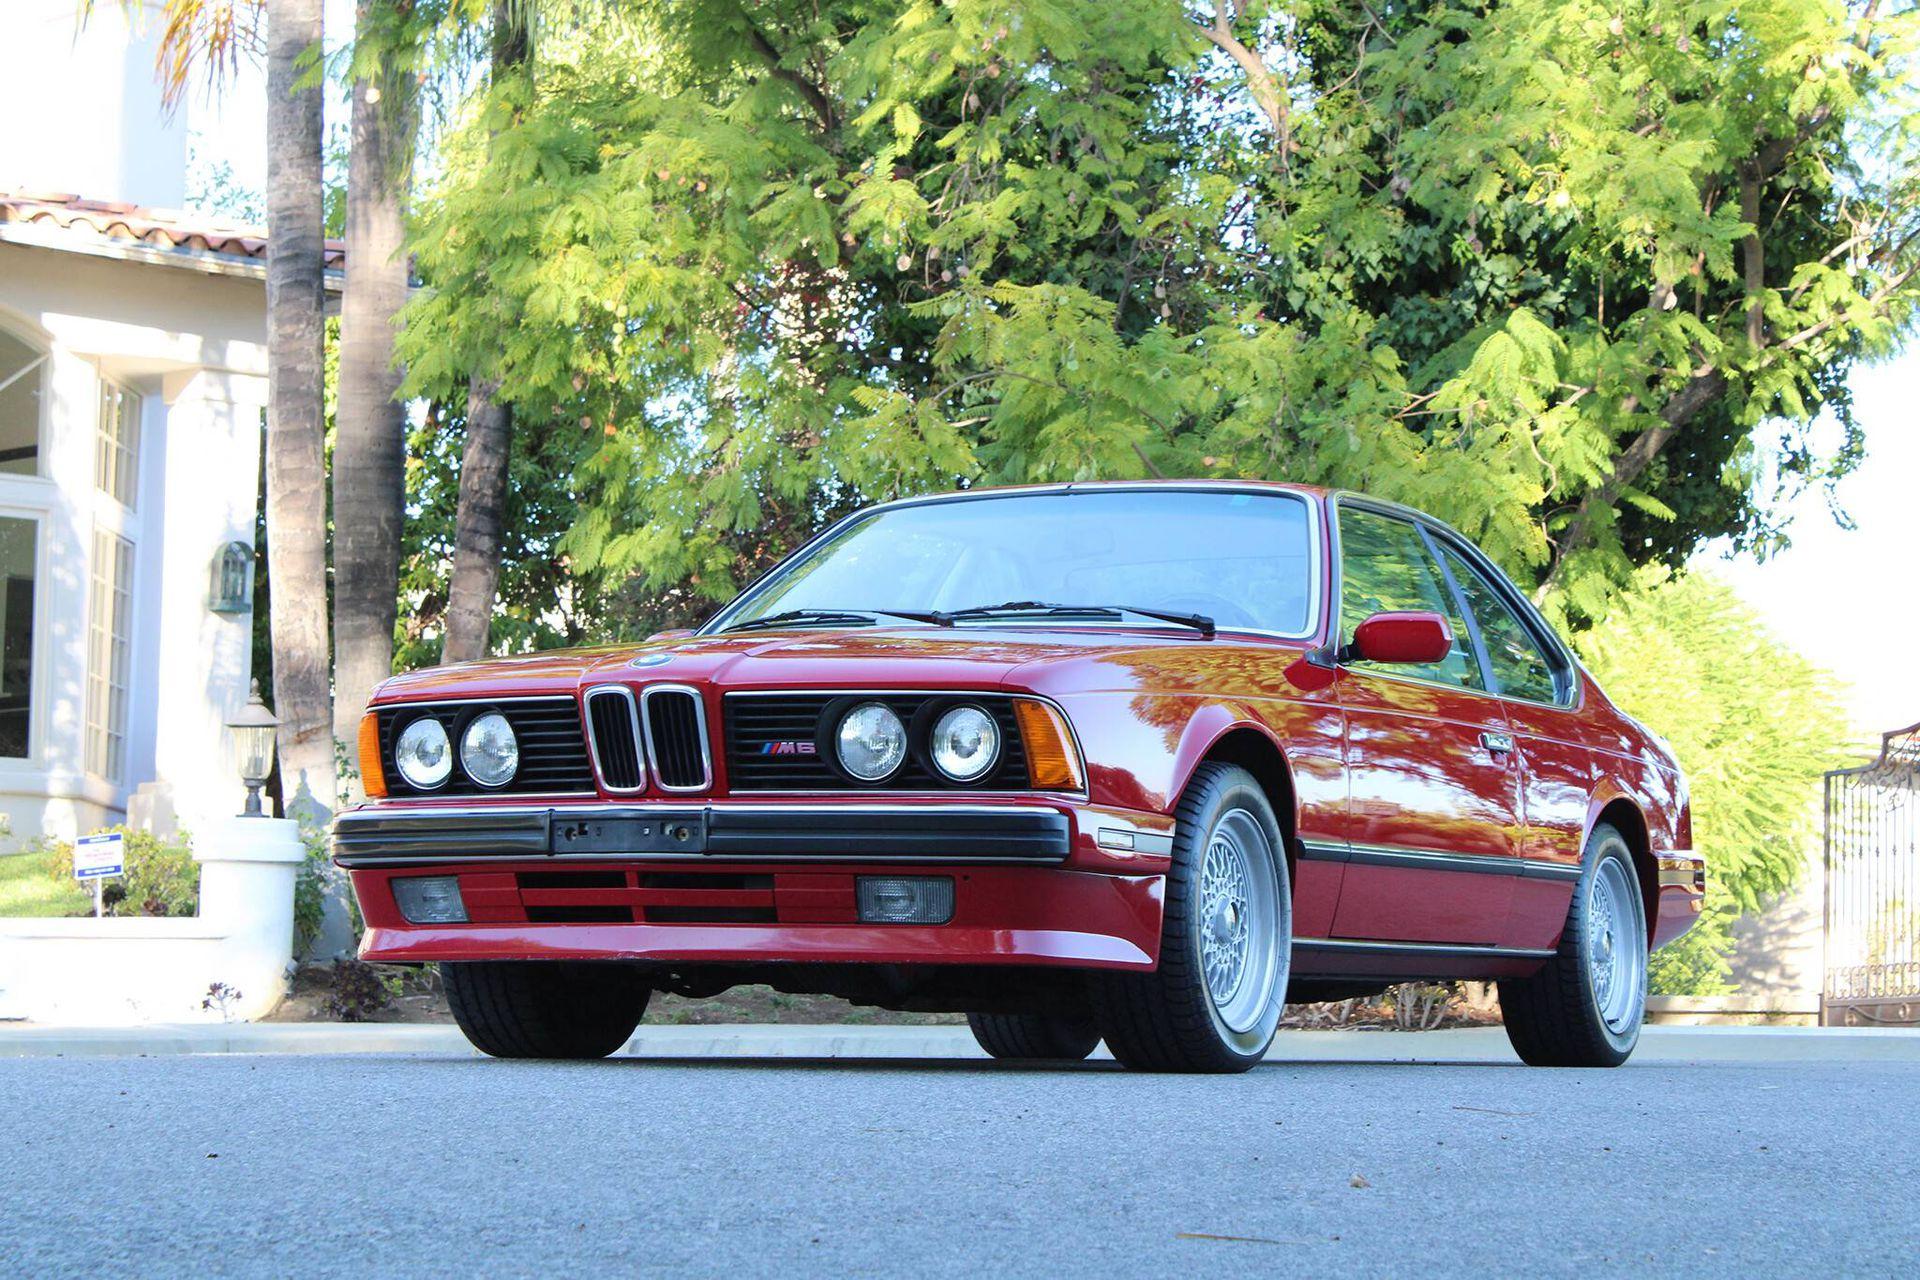 Find of the Day: This Shark Nose 1988 BMW M6 Packs a Big Bite